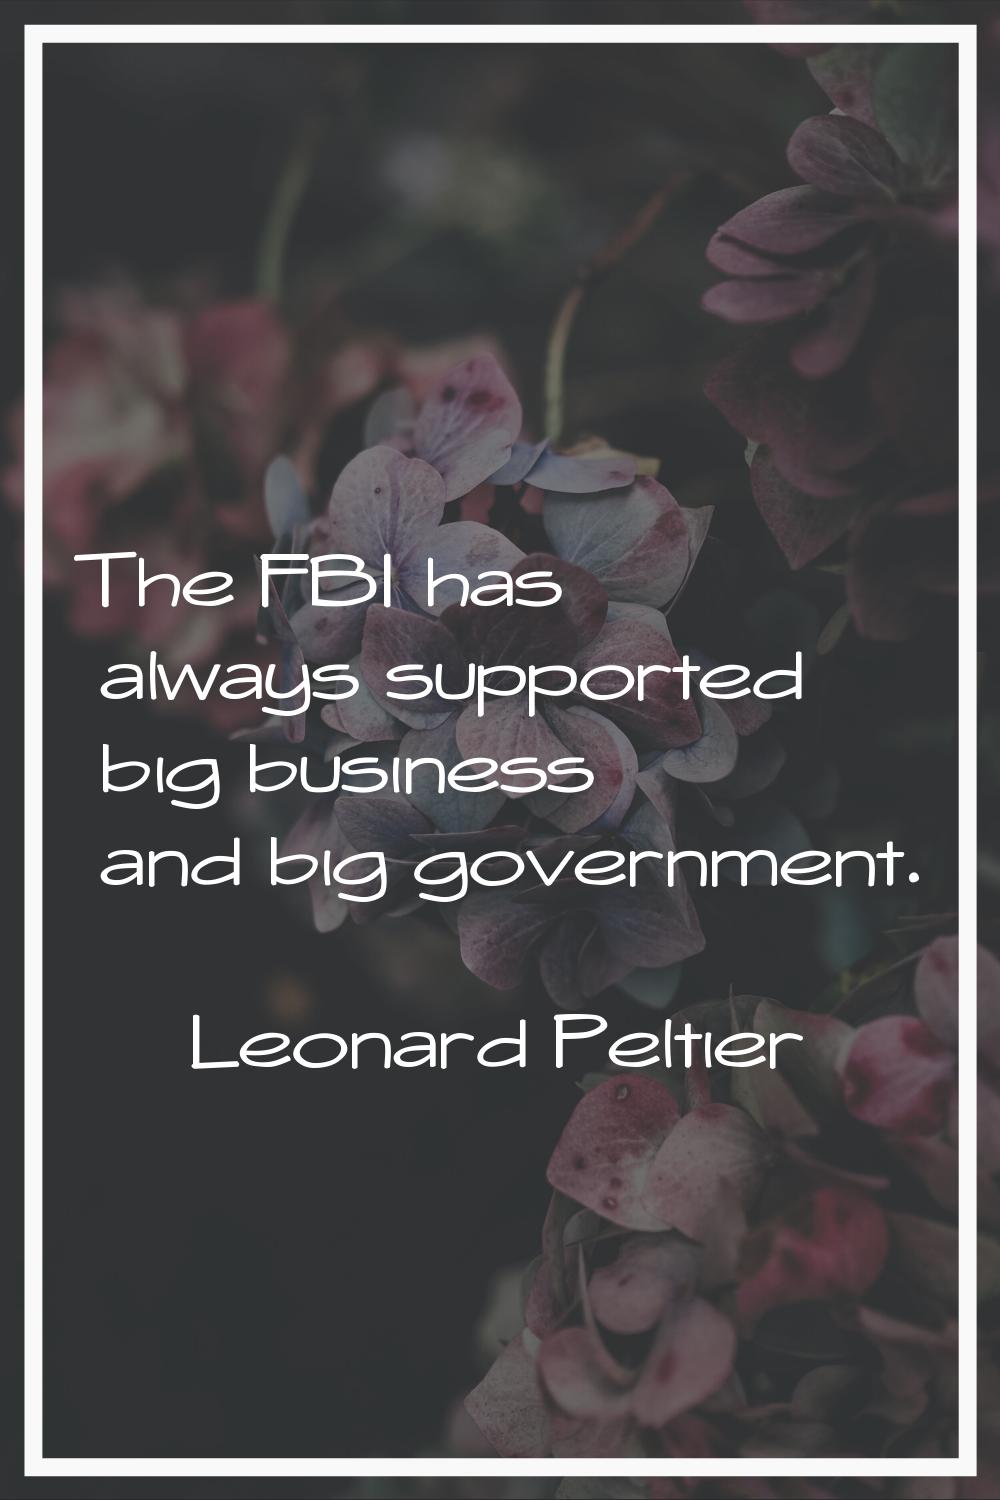 The FBI has always supported big business and big government.